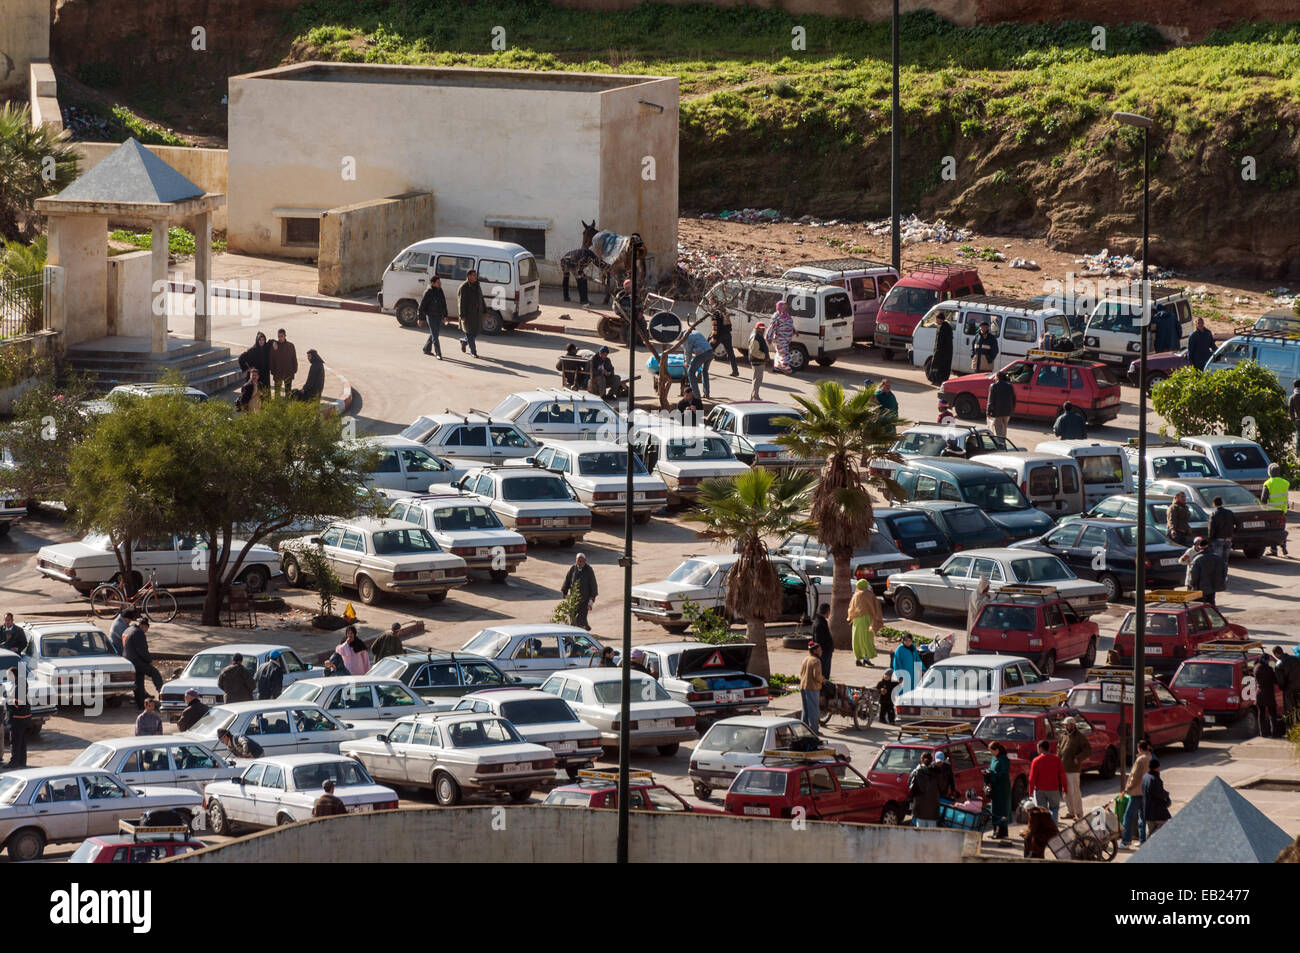 View over the grand taxi station in Fez. December 3, 2008 in Fez, Morocco, Africa Stock Photo